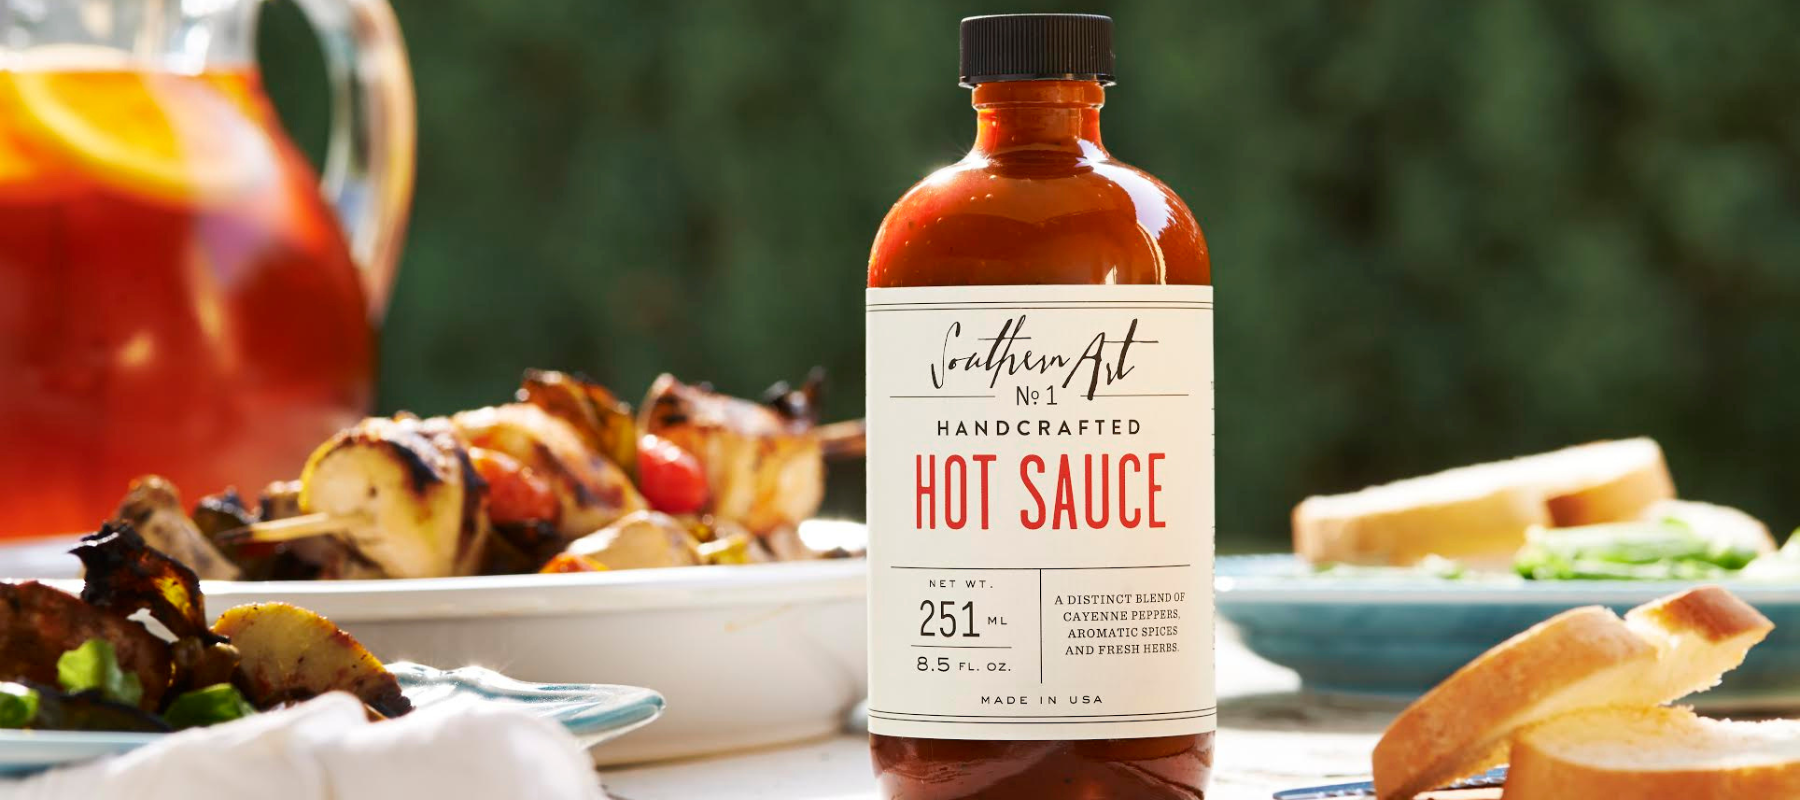 Meet the Makers: Kelly Han and Hannah Yee of Southern Art Sauce Co.